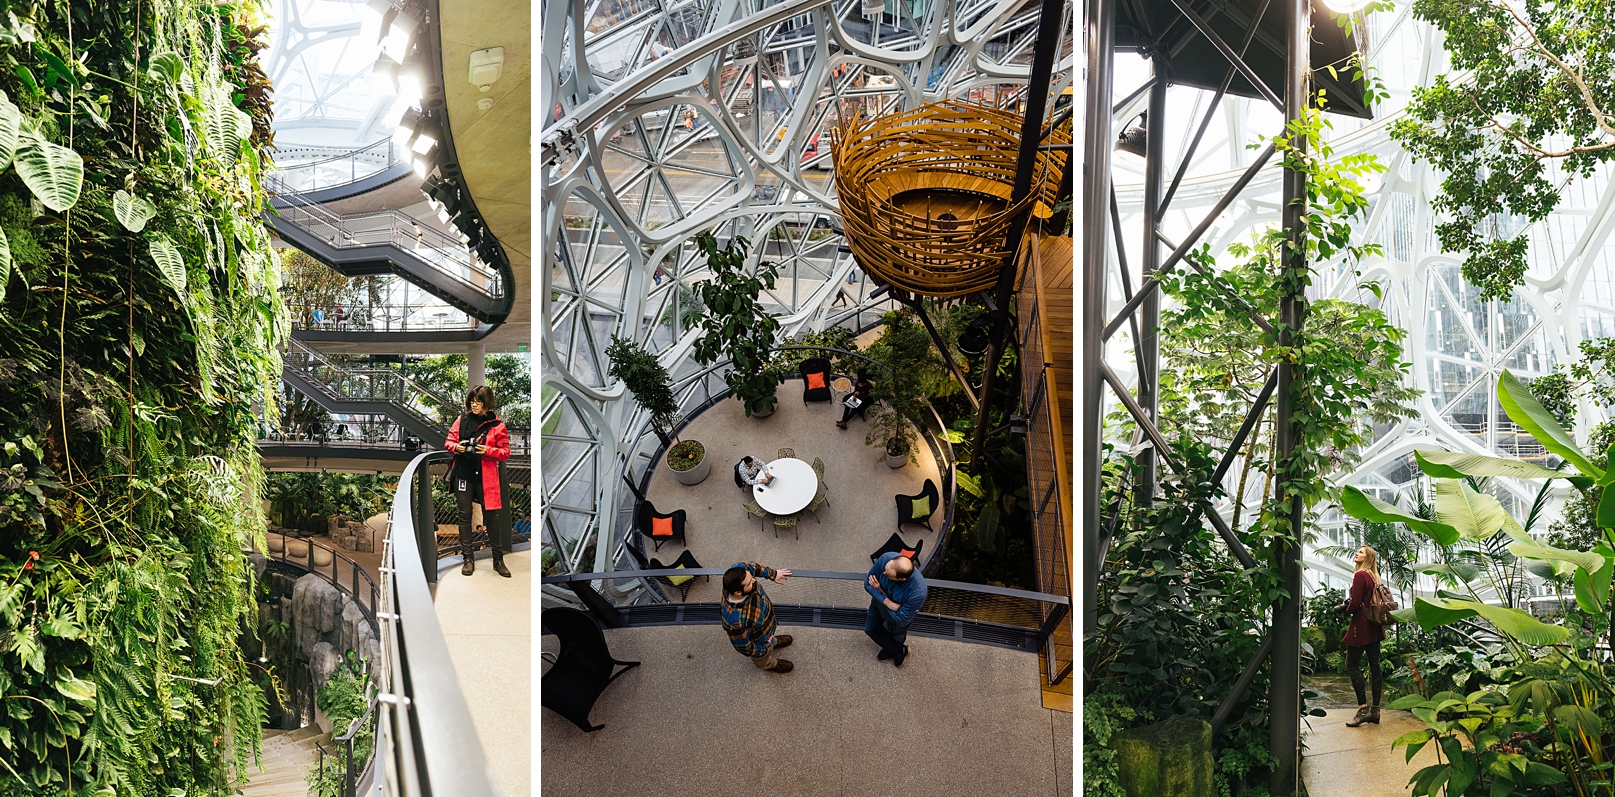 Inside the Amazon spheres in Seattle